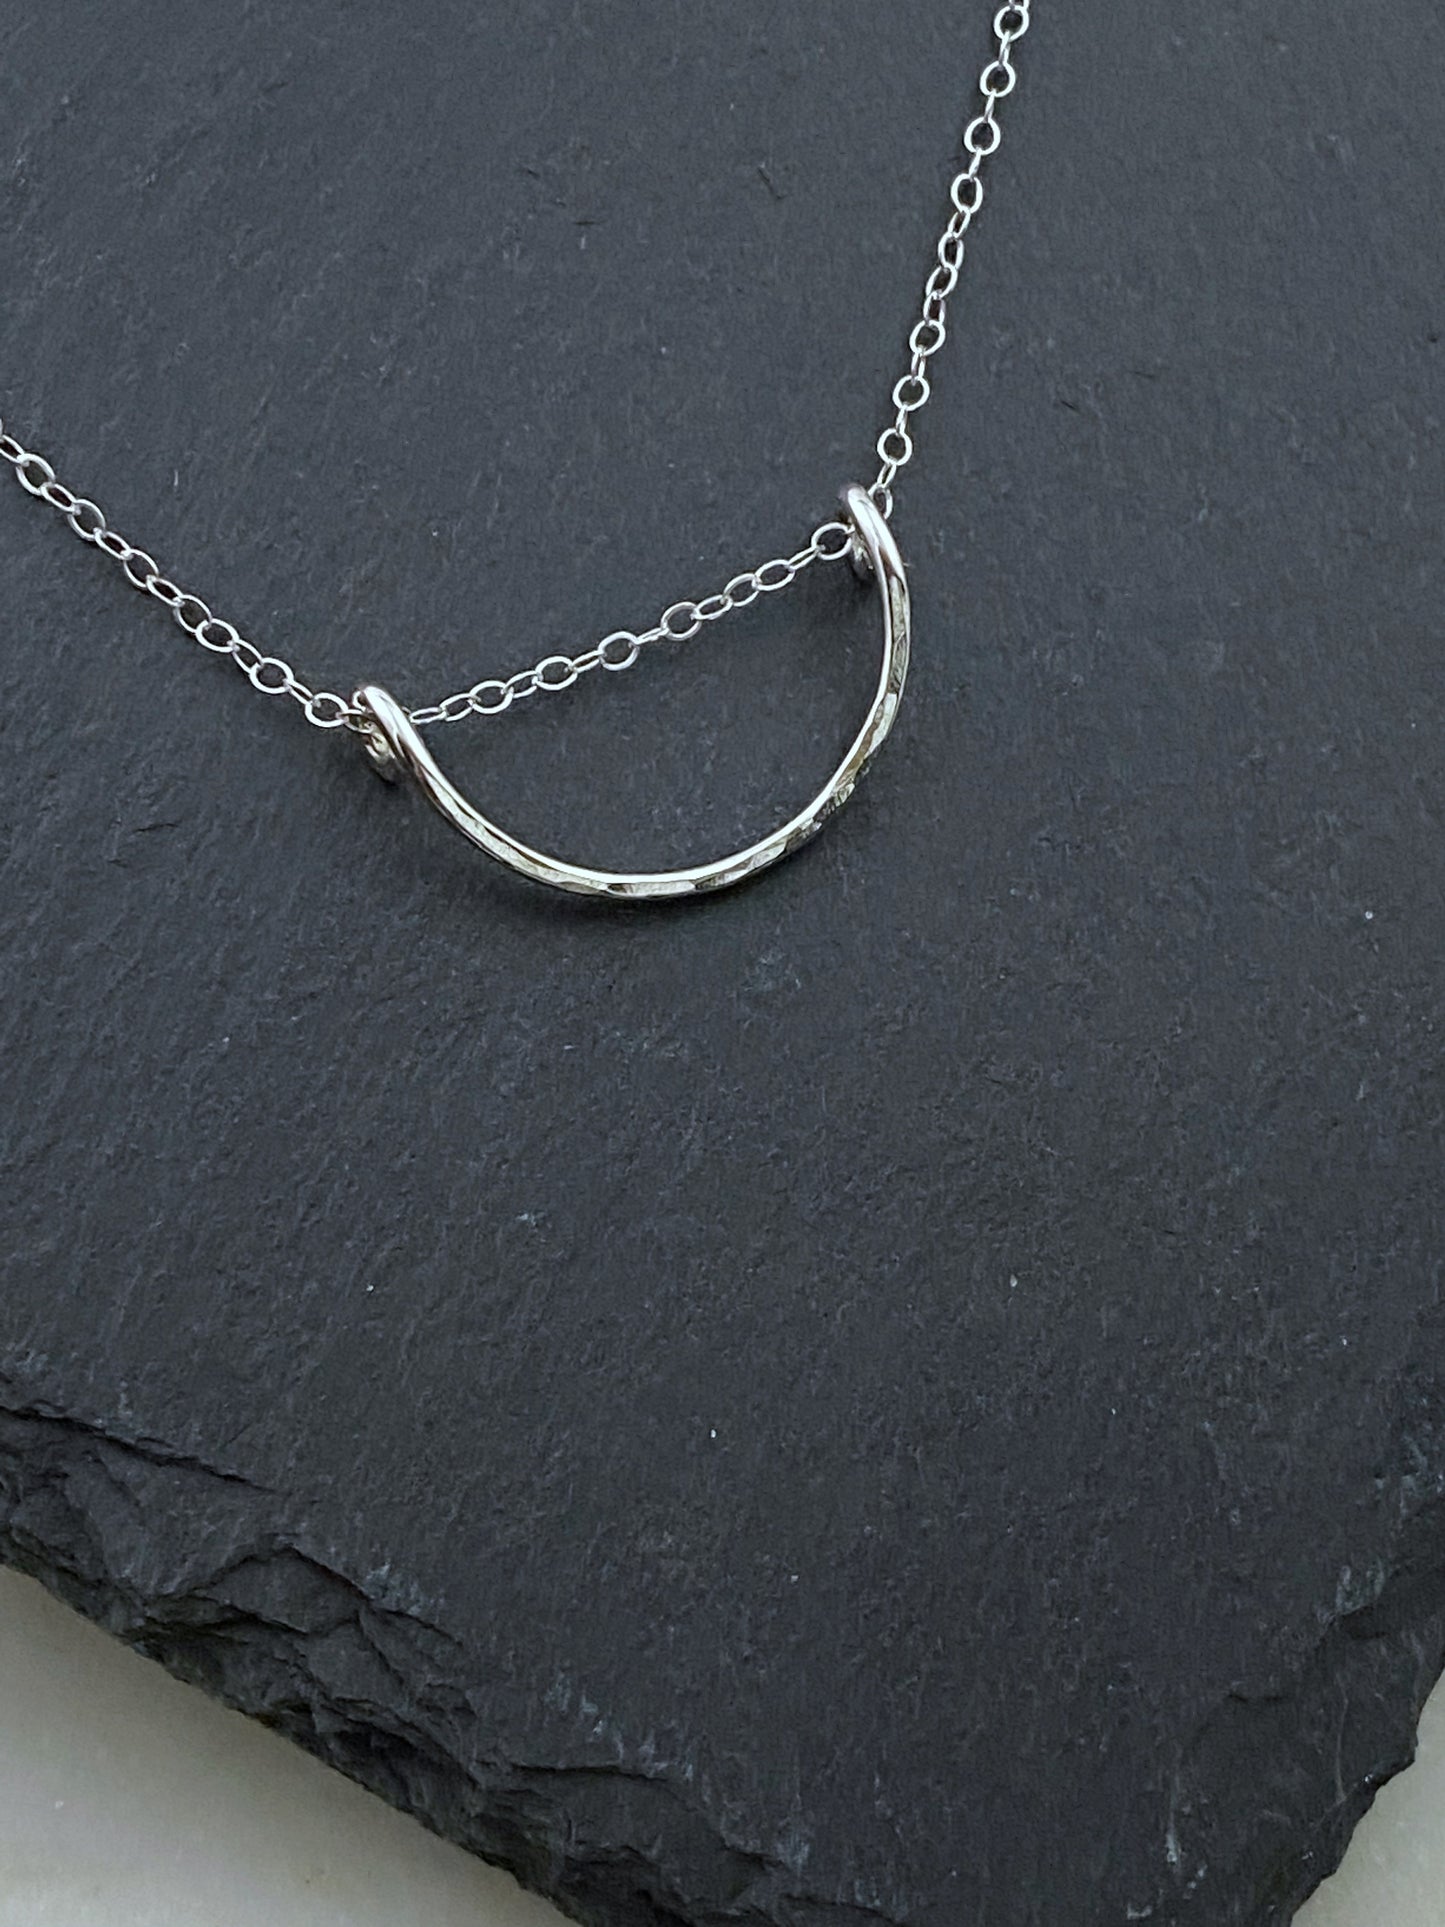 Forged sterling silver wire half moon necklace